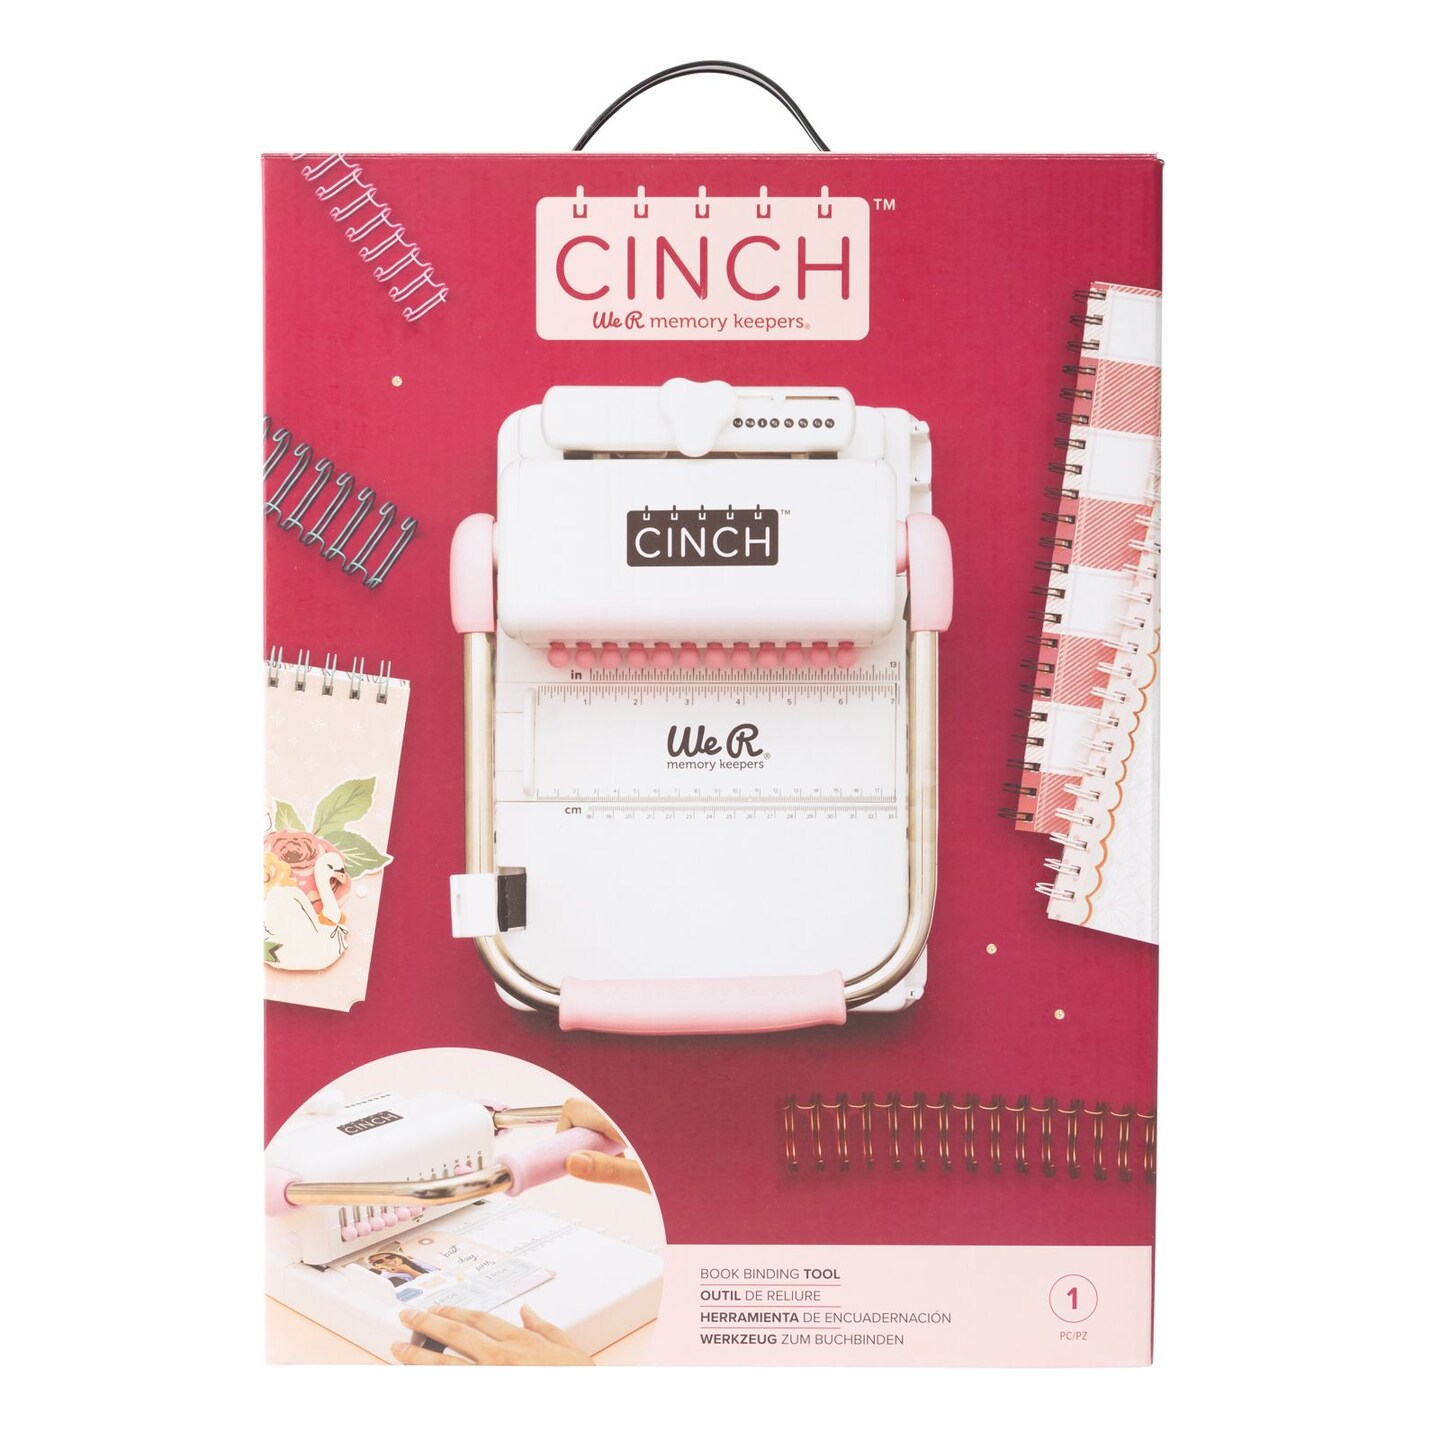 Inspiration Journals-the Cinch Binding Machine} - The Crafting Chicks